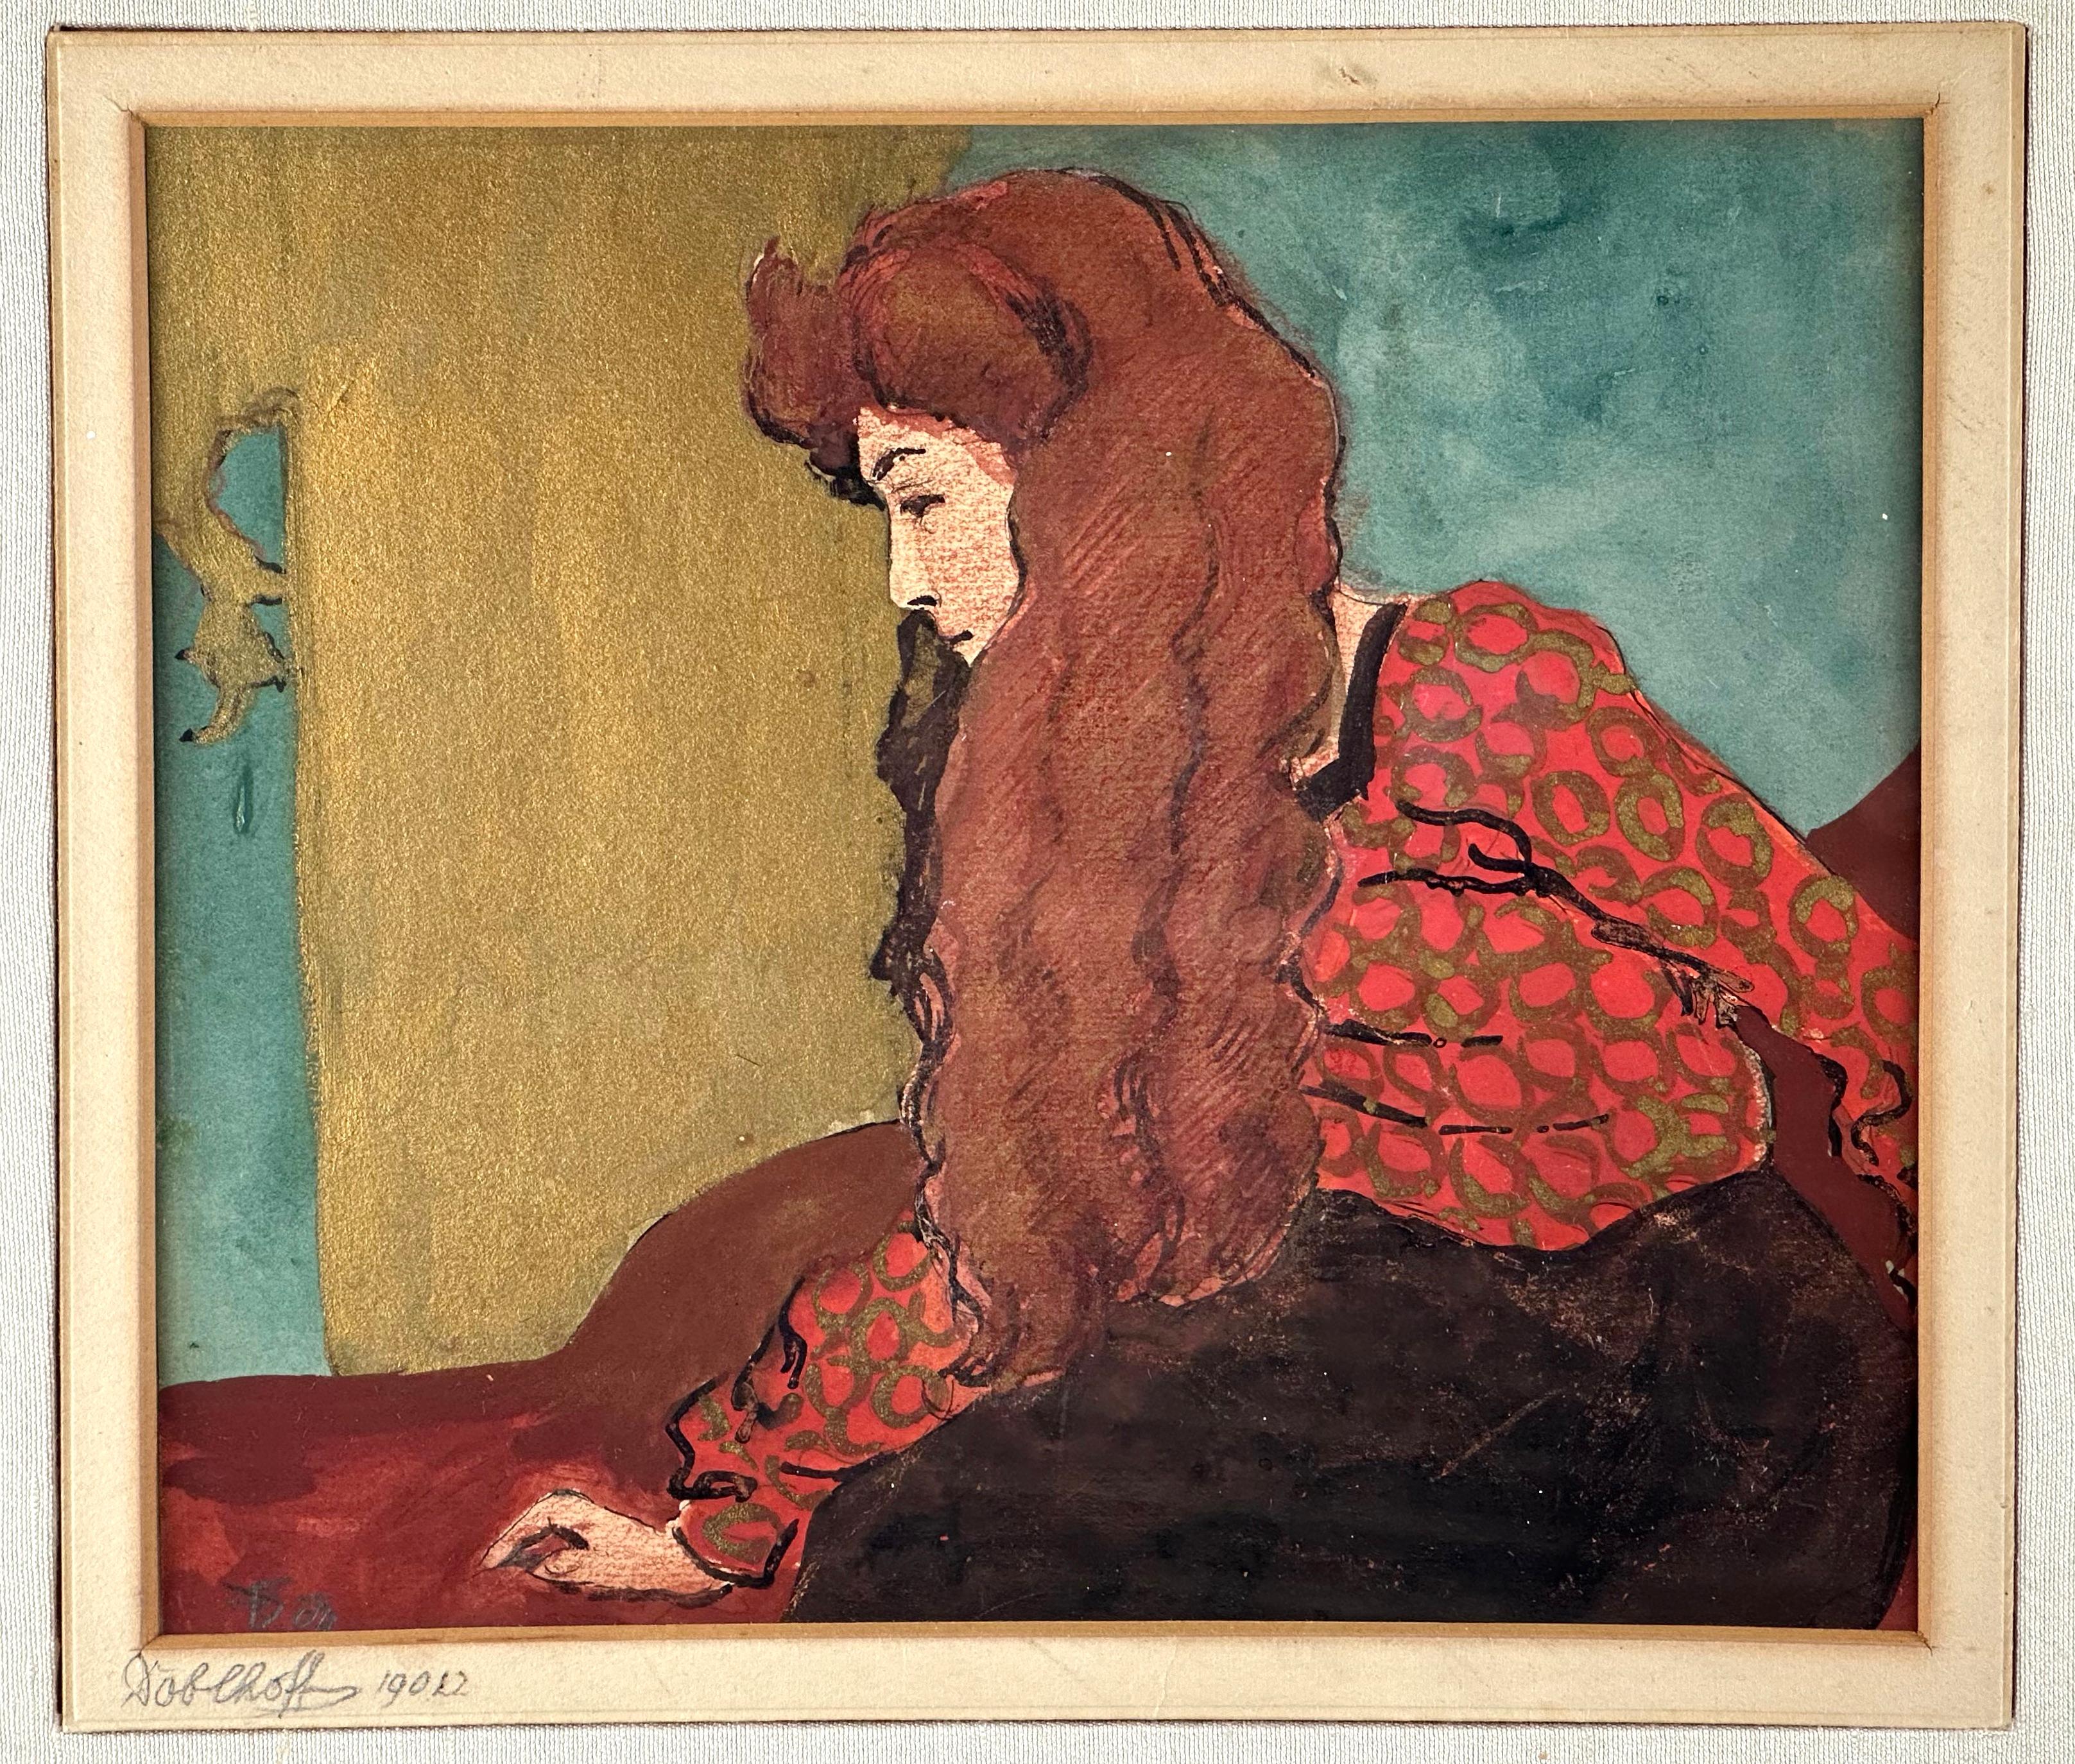 Vienna Secession Paintings